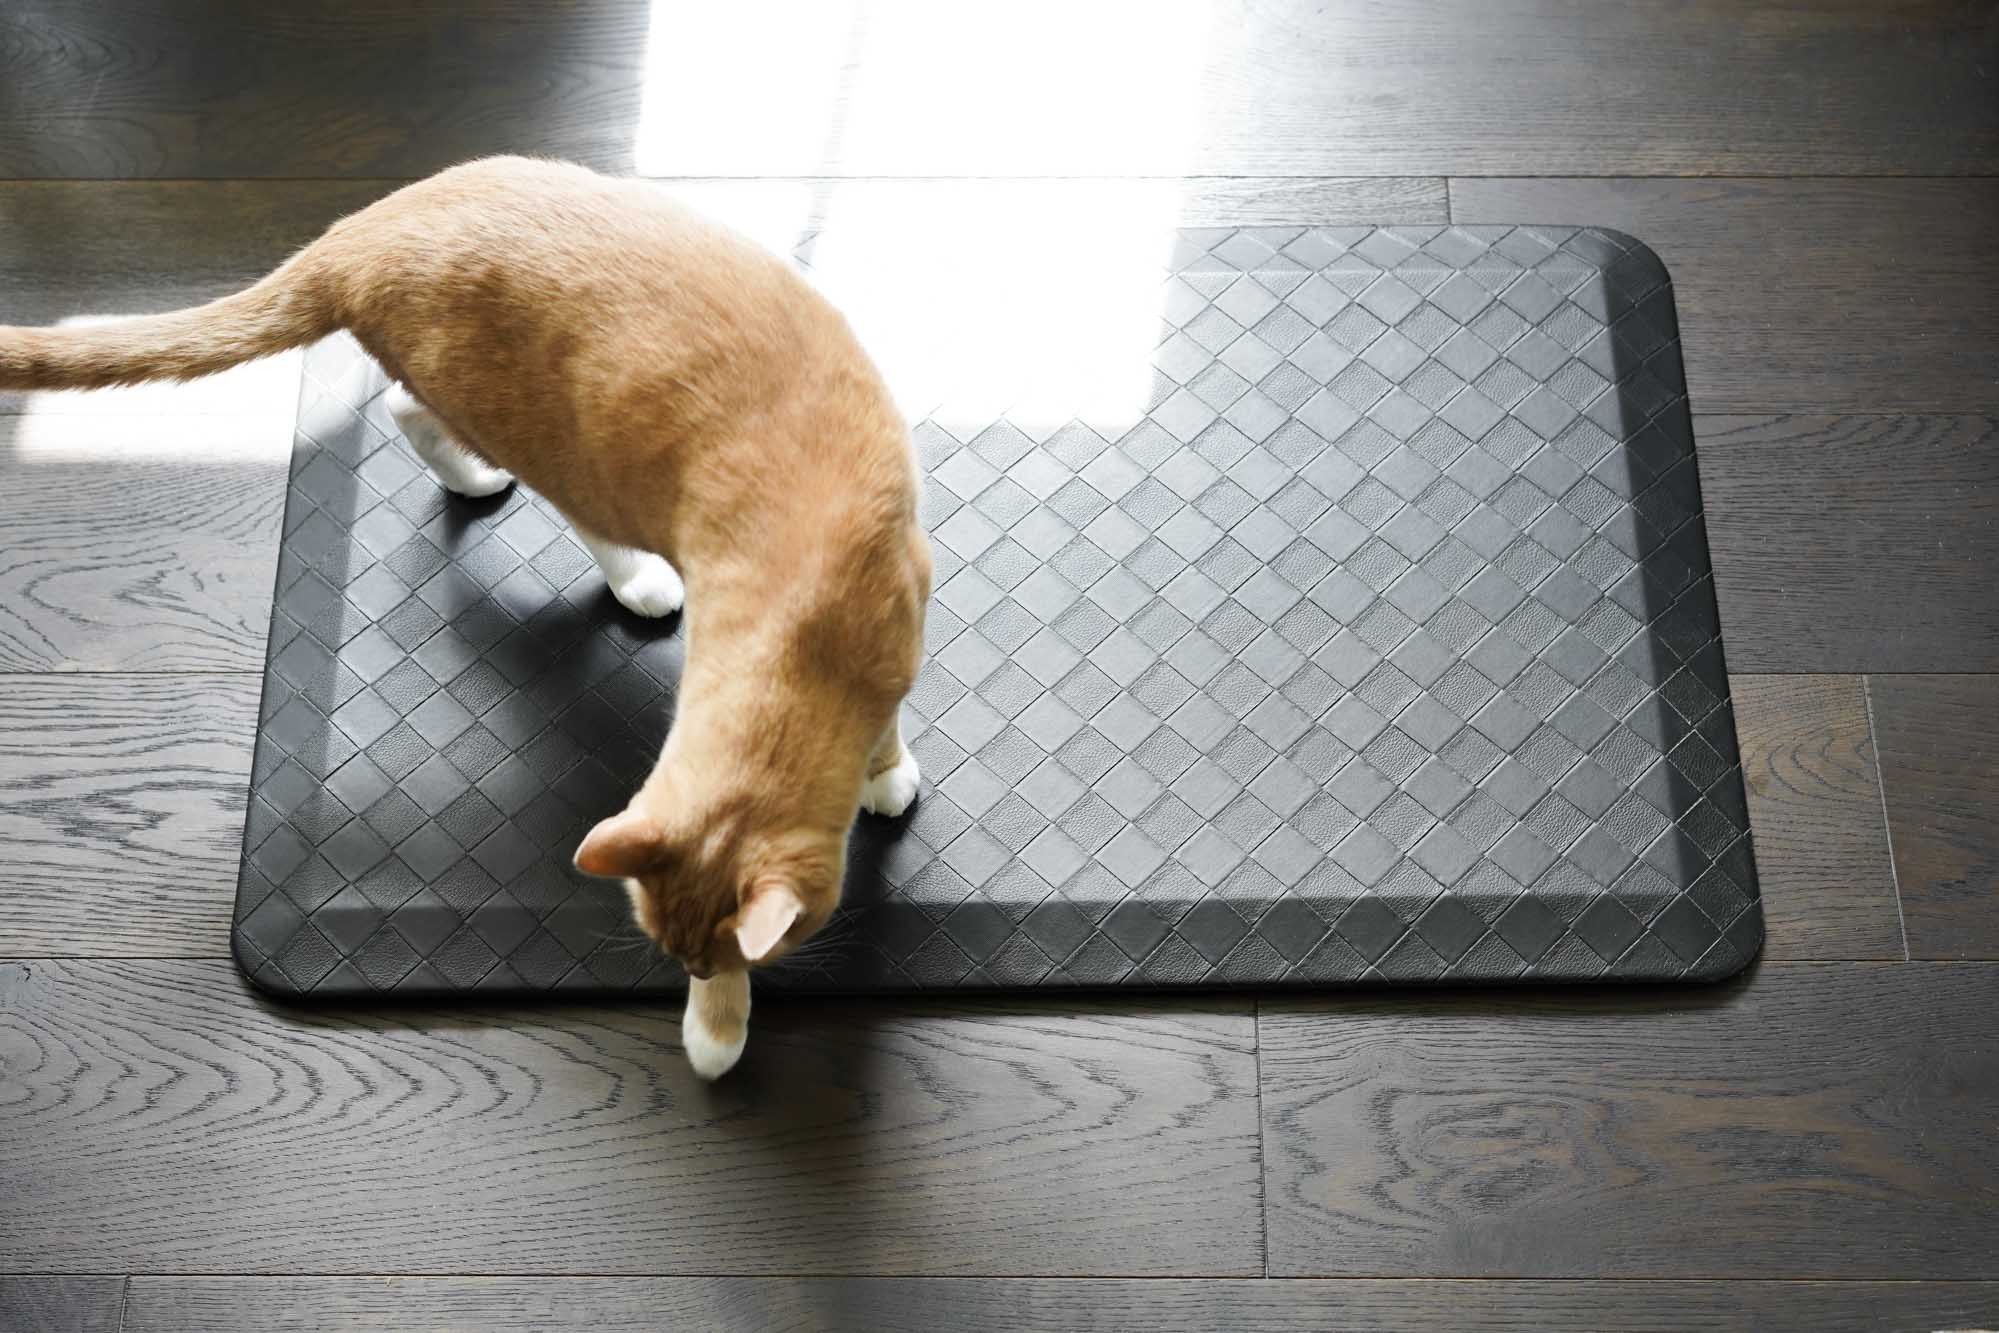 The Best Anti-Fatigue Mats of 2022 - Reviews by Your Best Digs